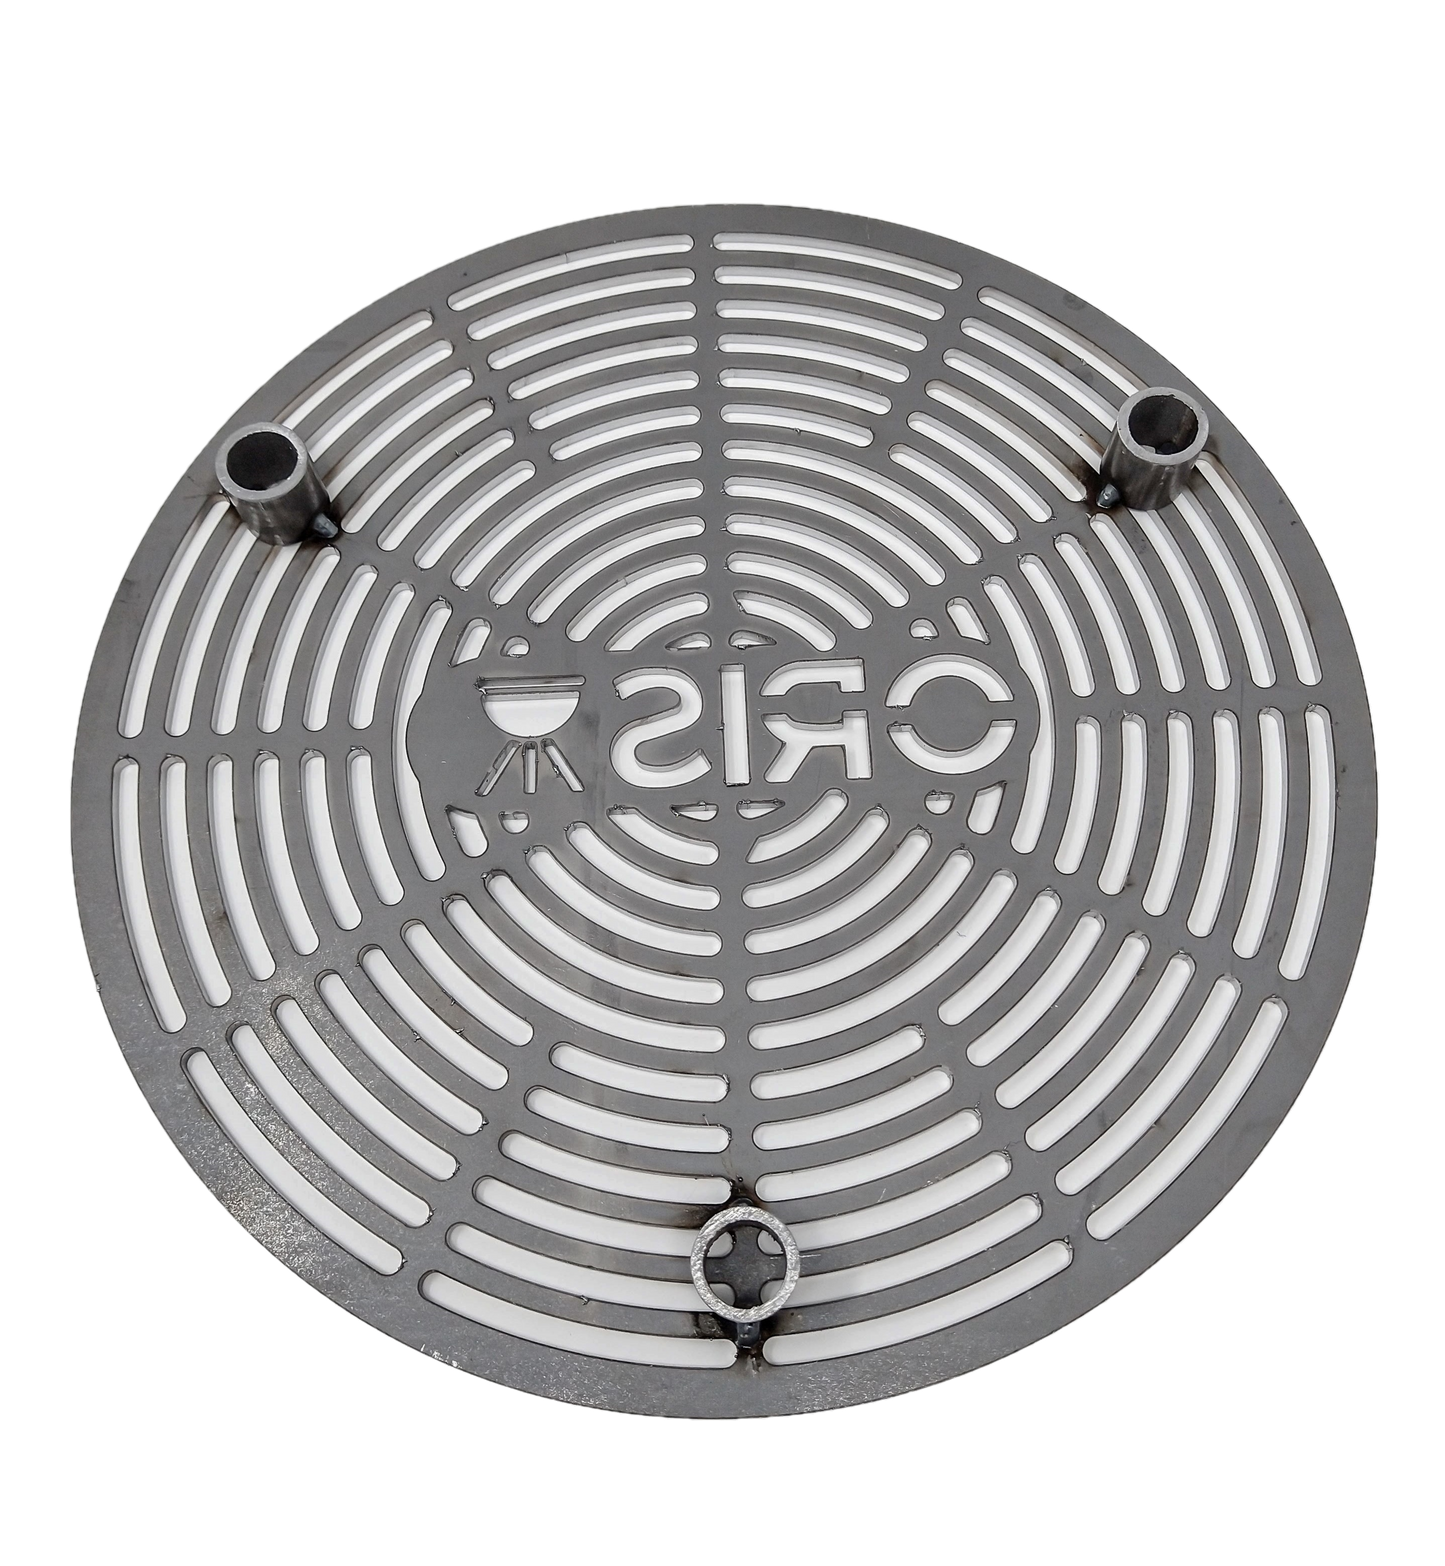 Oris top grate for better pan stability